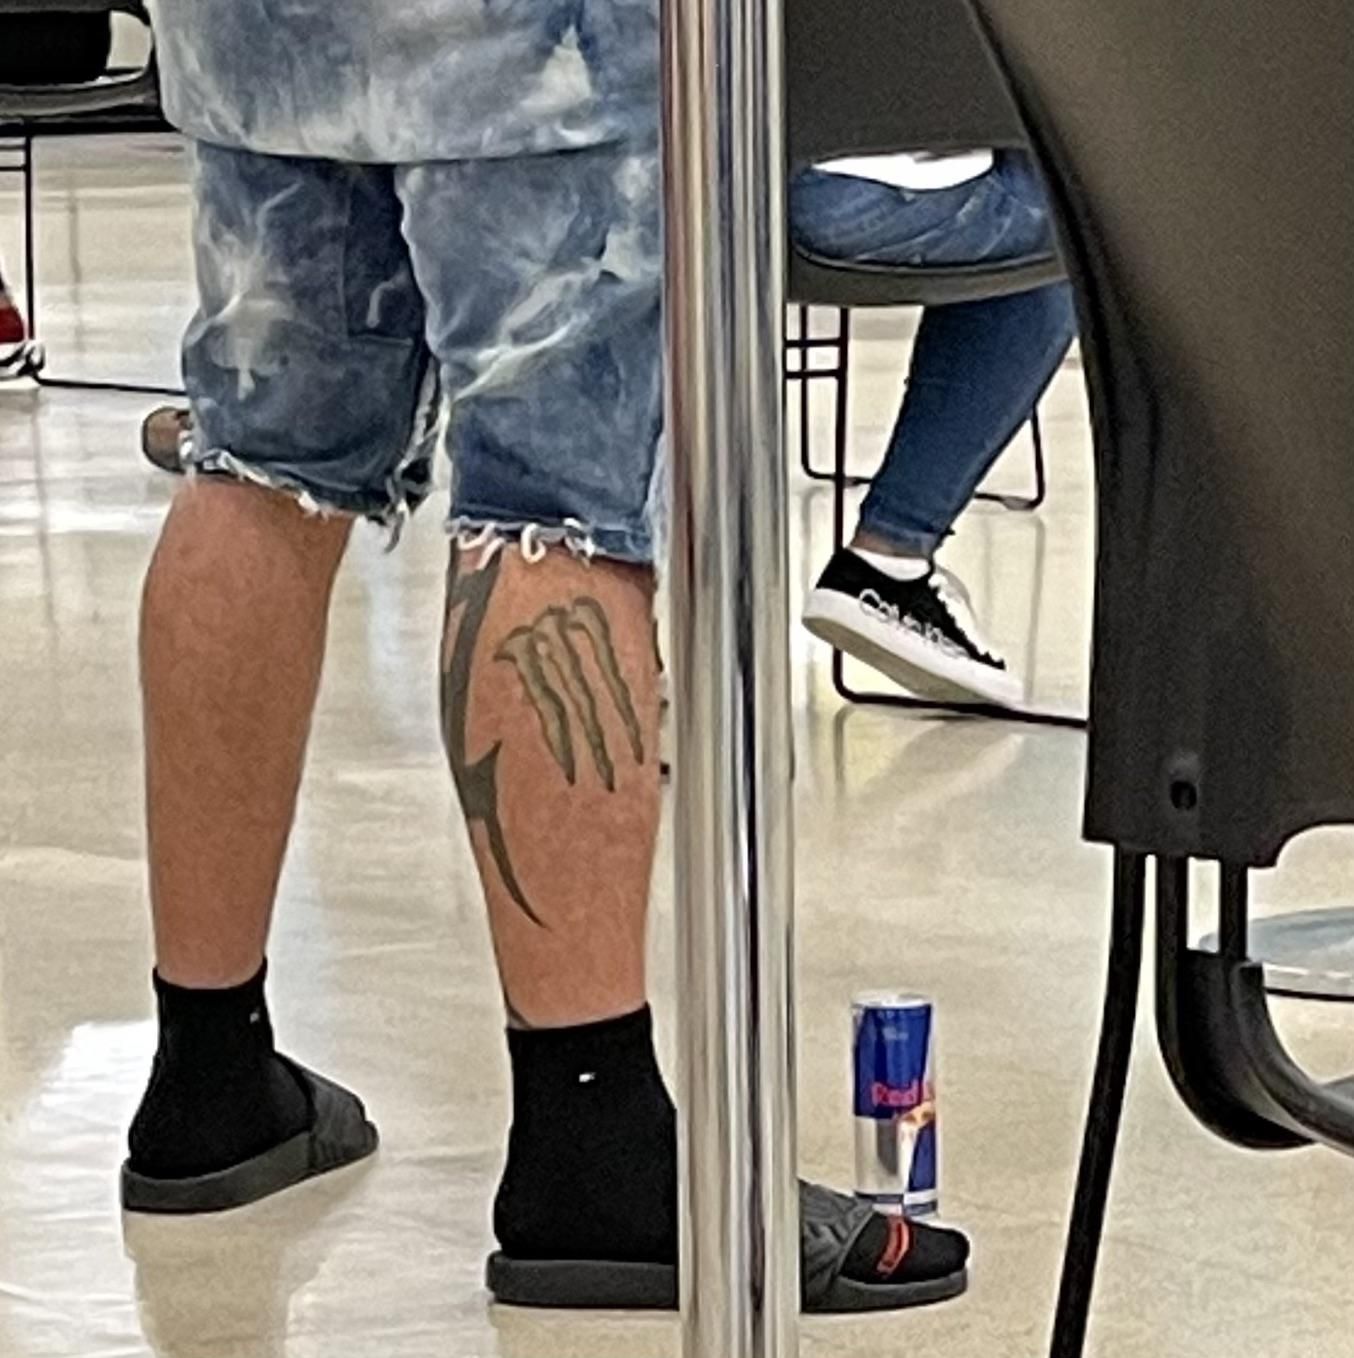 With such a tattoo, you would think he would have more brand loyalty than that.